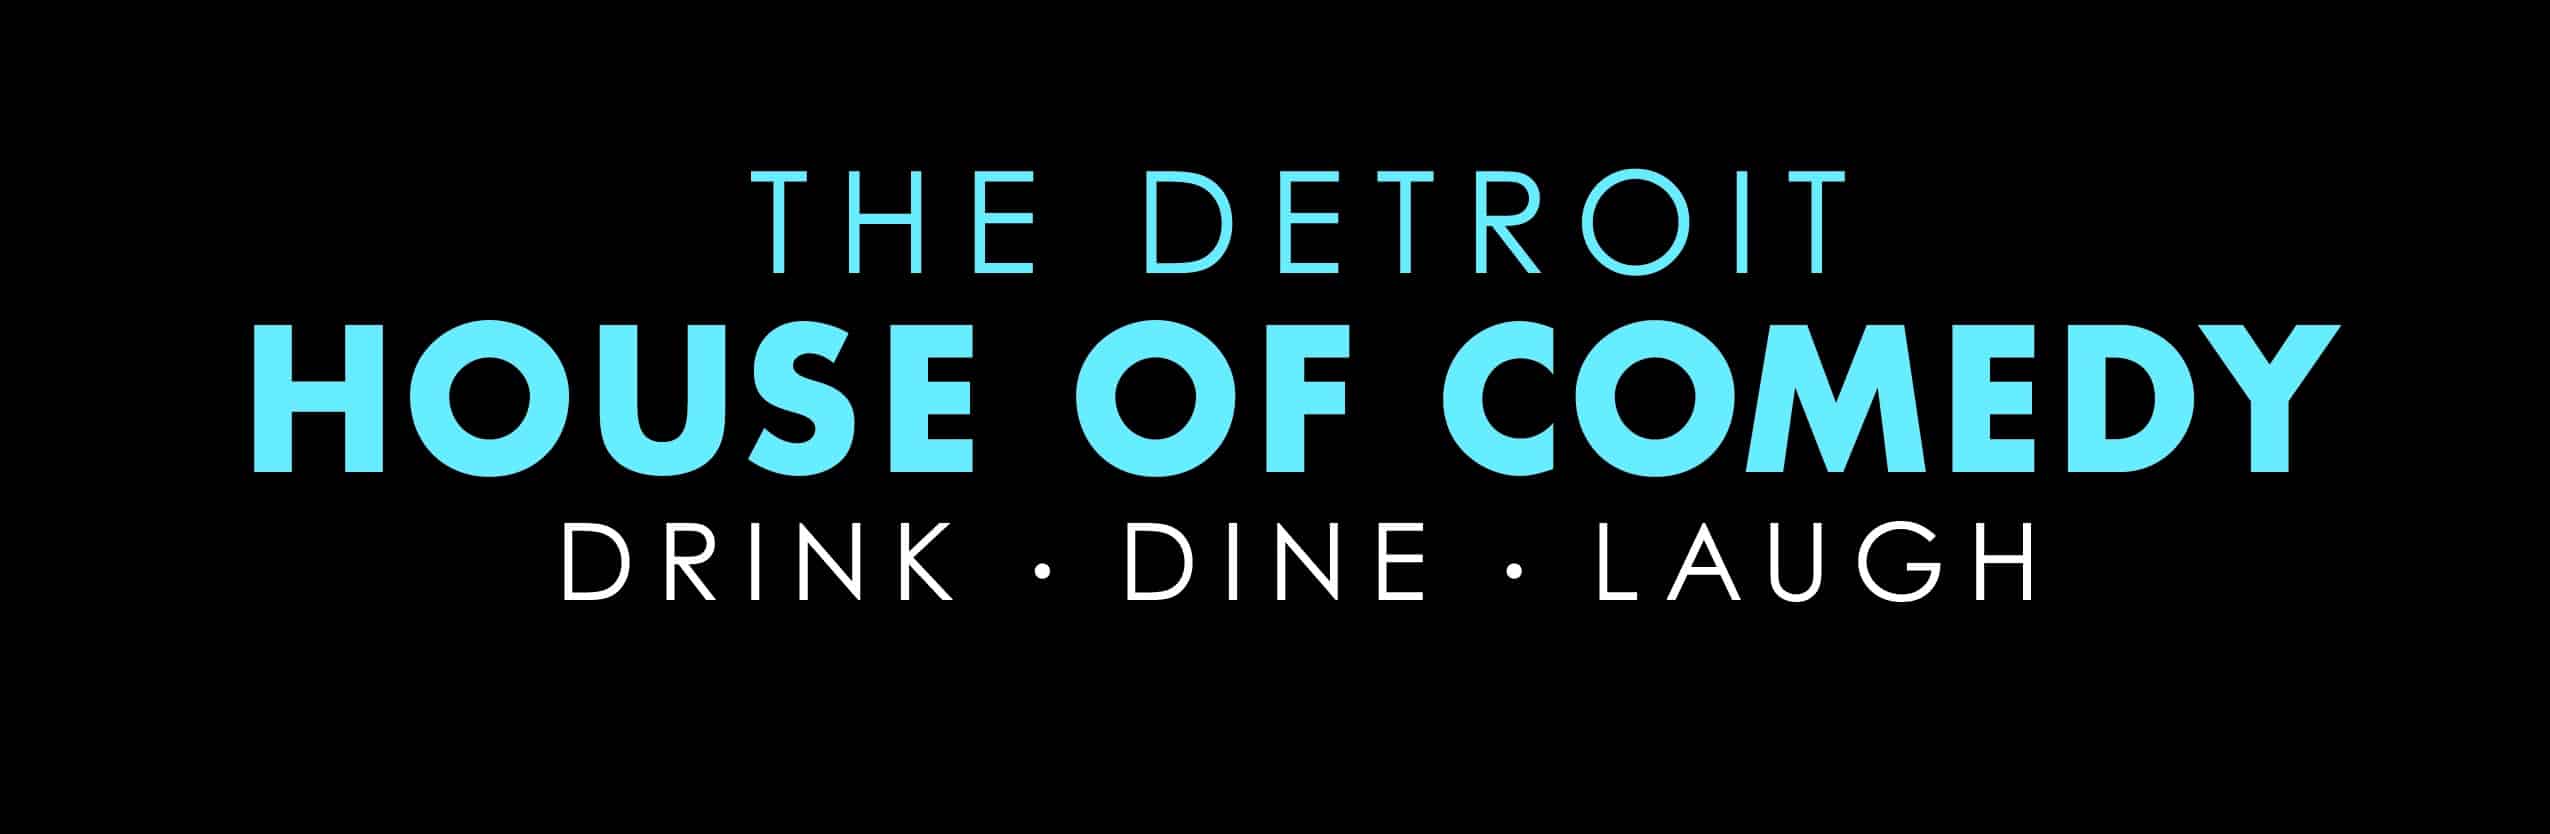 Detroit House of Comedy